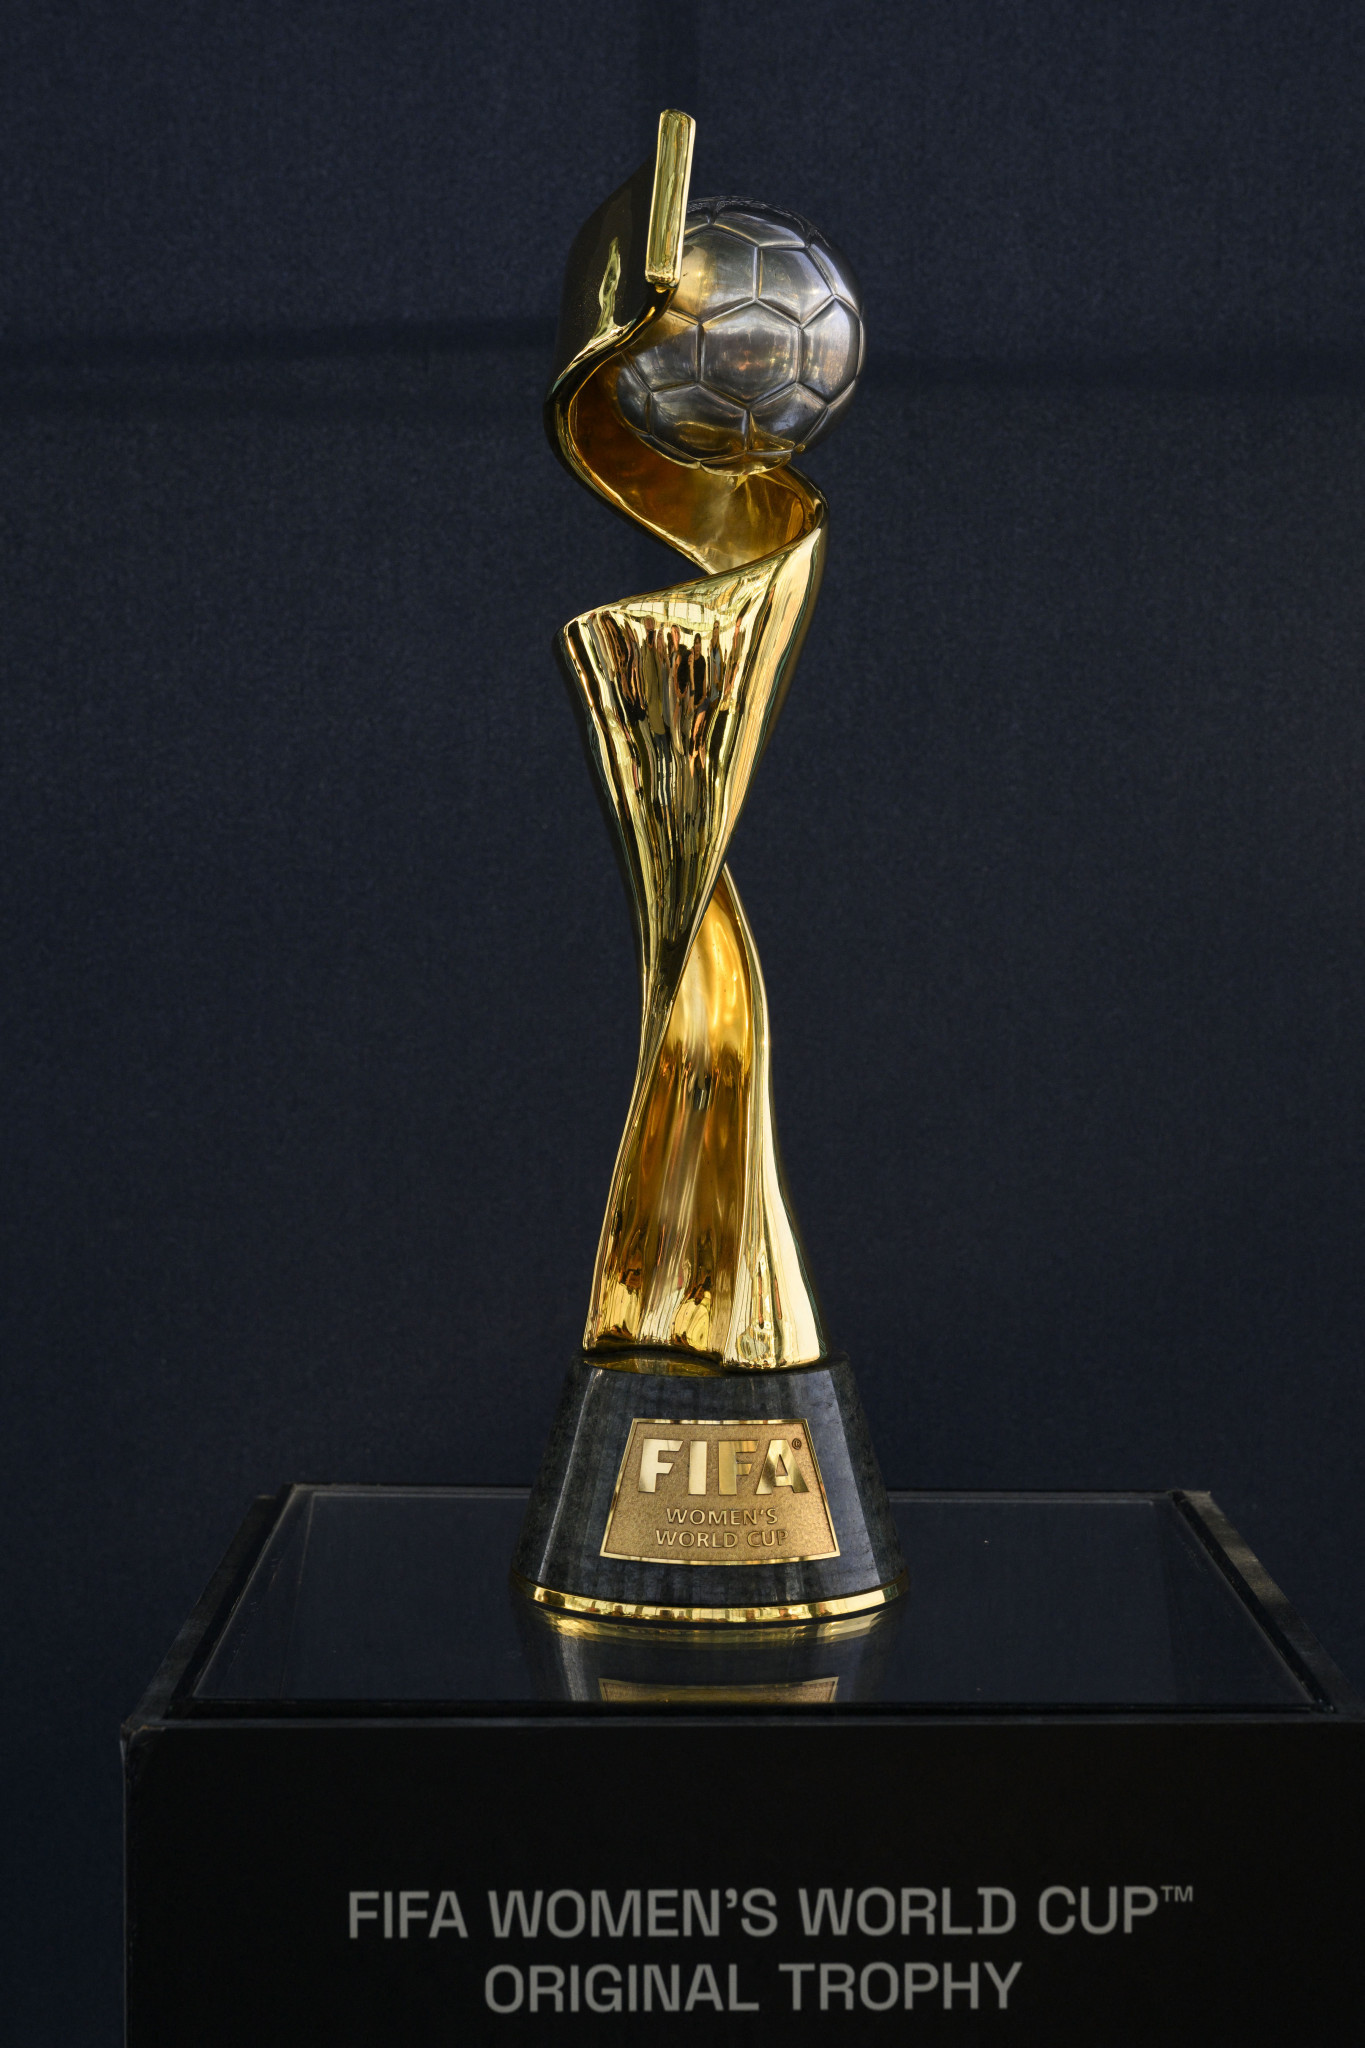 The expanded FIFA Women's World Cup is set to run from July 20 to August 20 this year ©Getty Images
